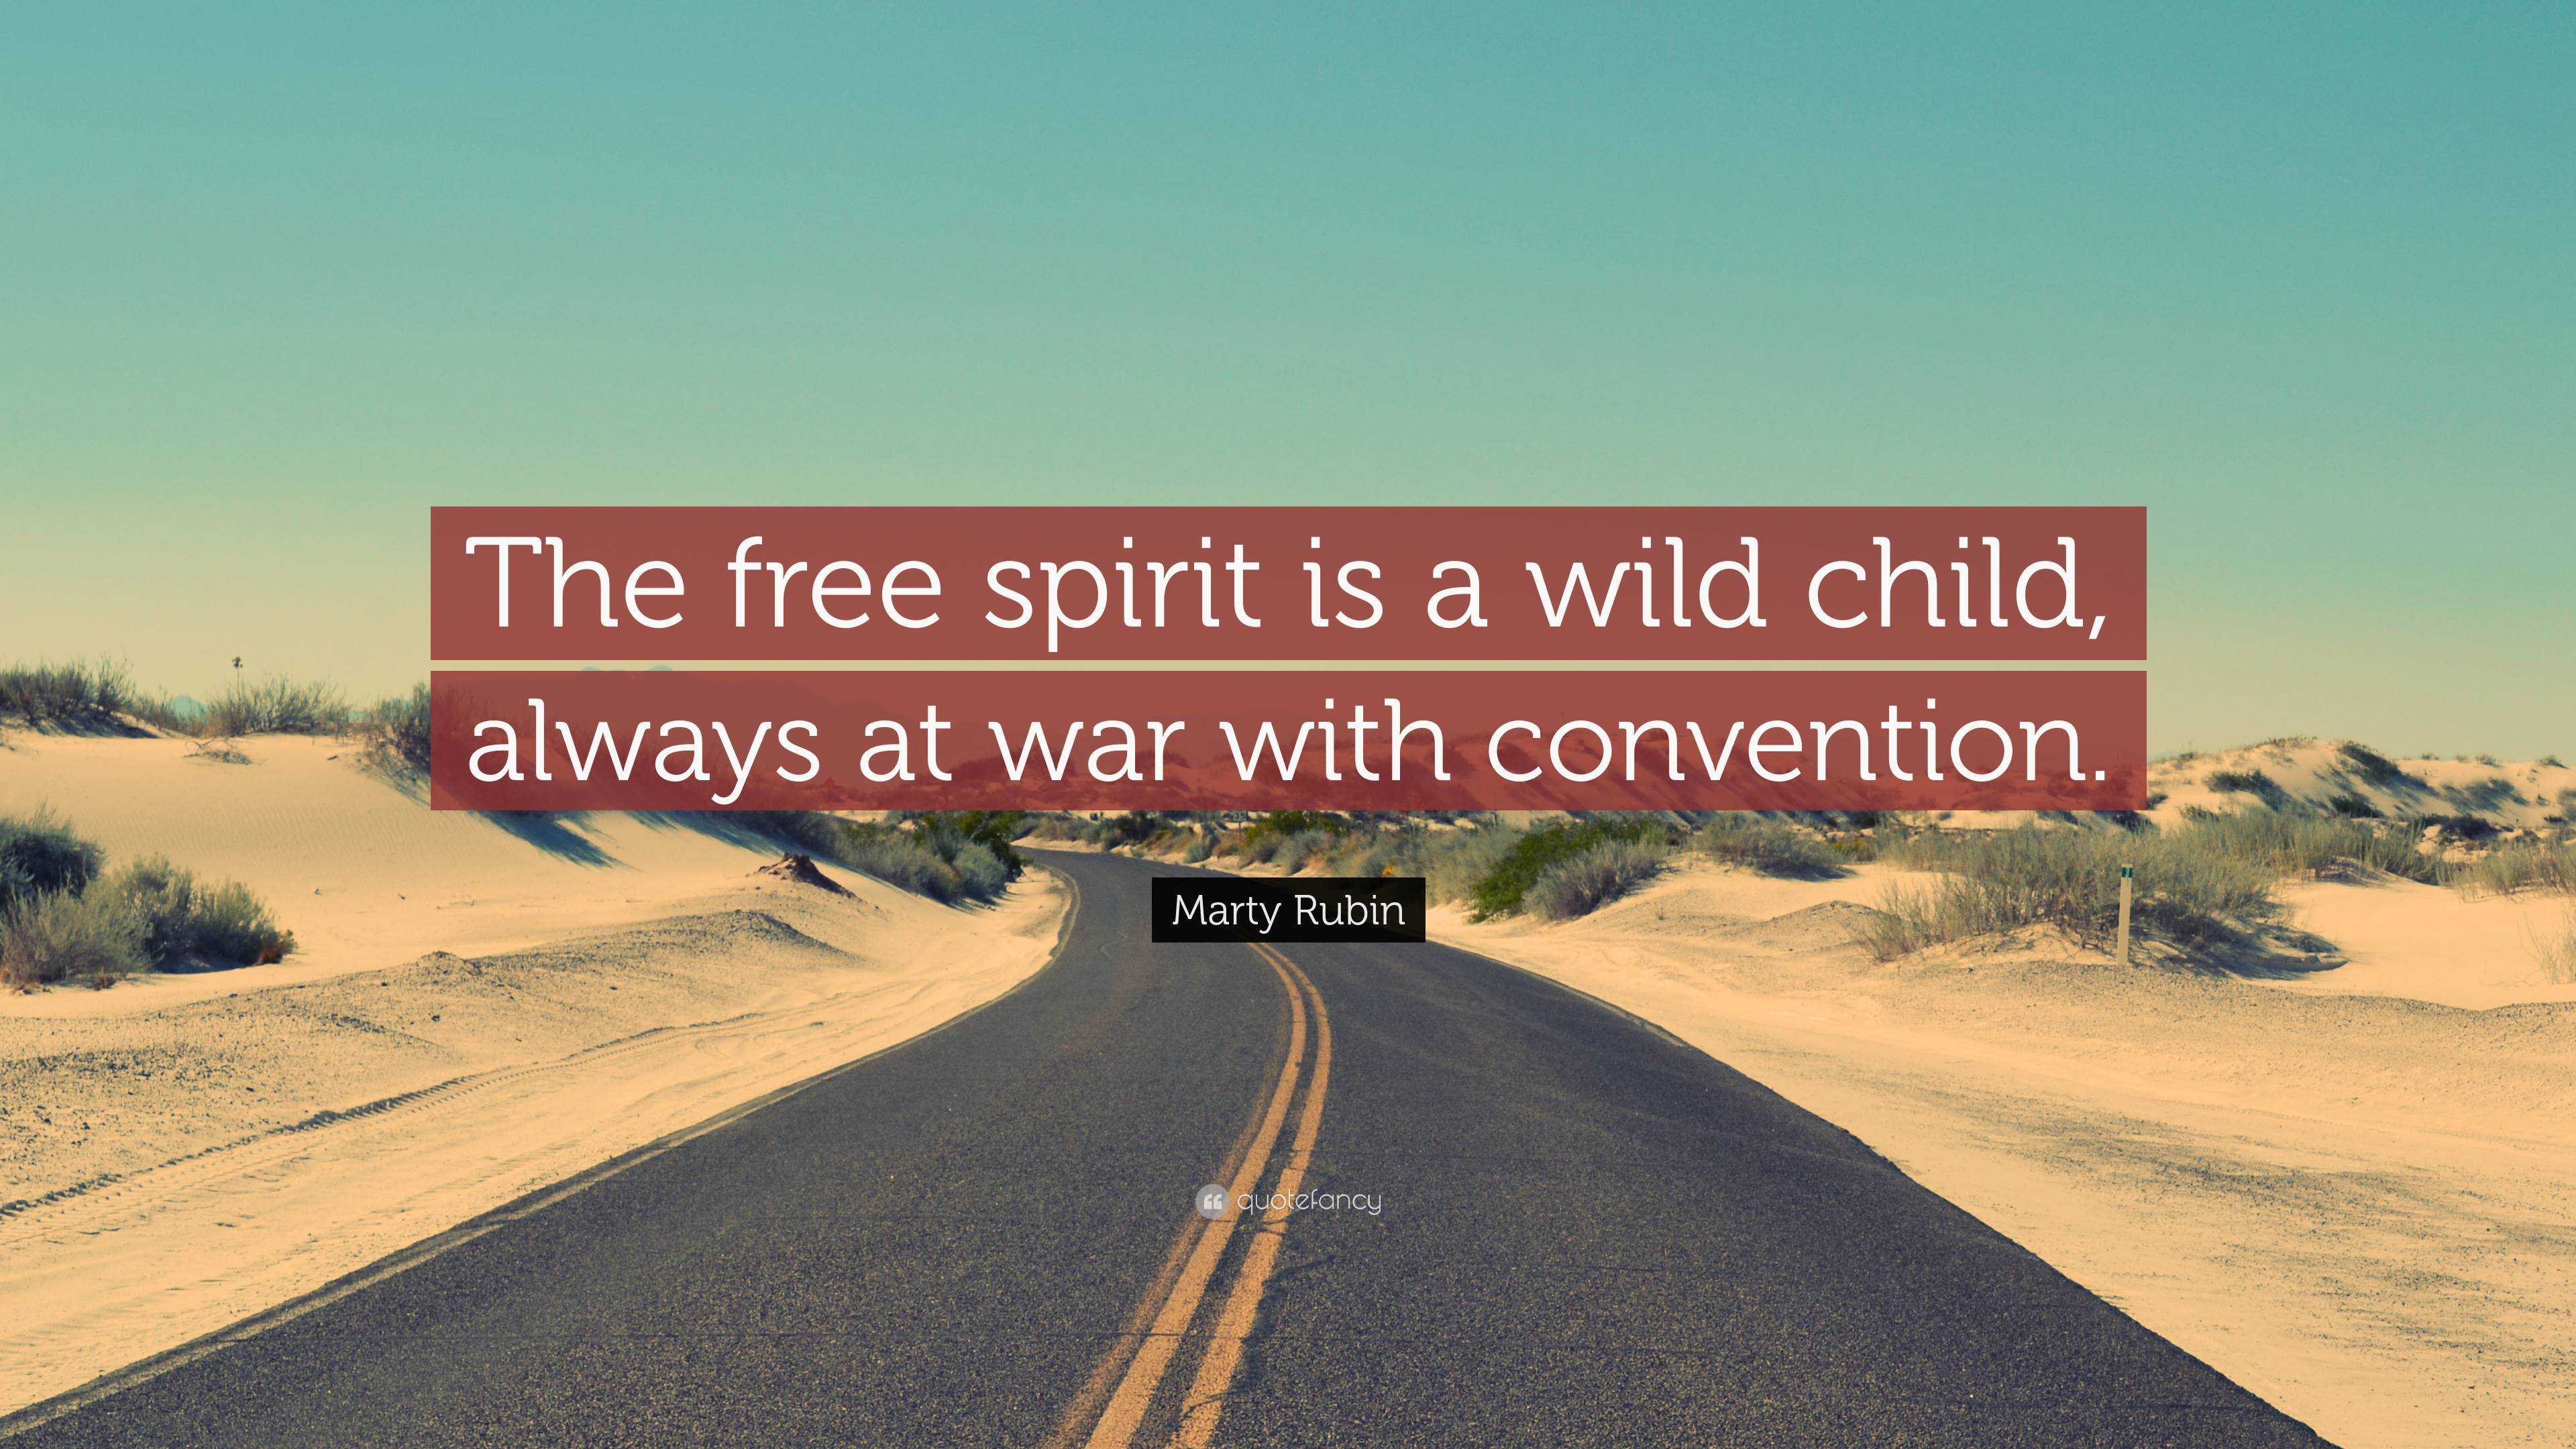 Marty Rubin Quote: “The free spirit is a wild child, always at war with  convention.”